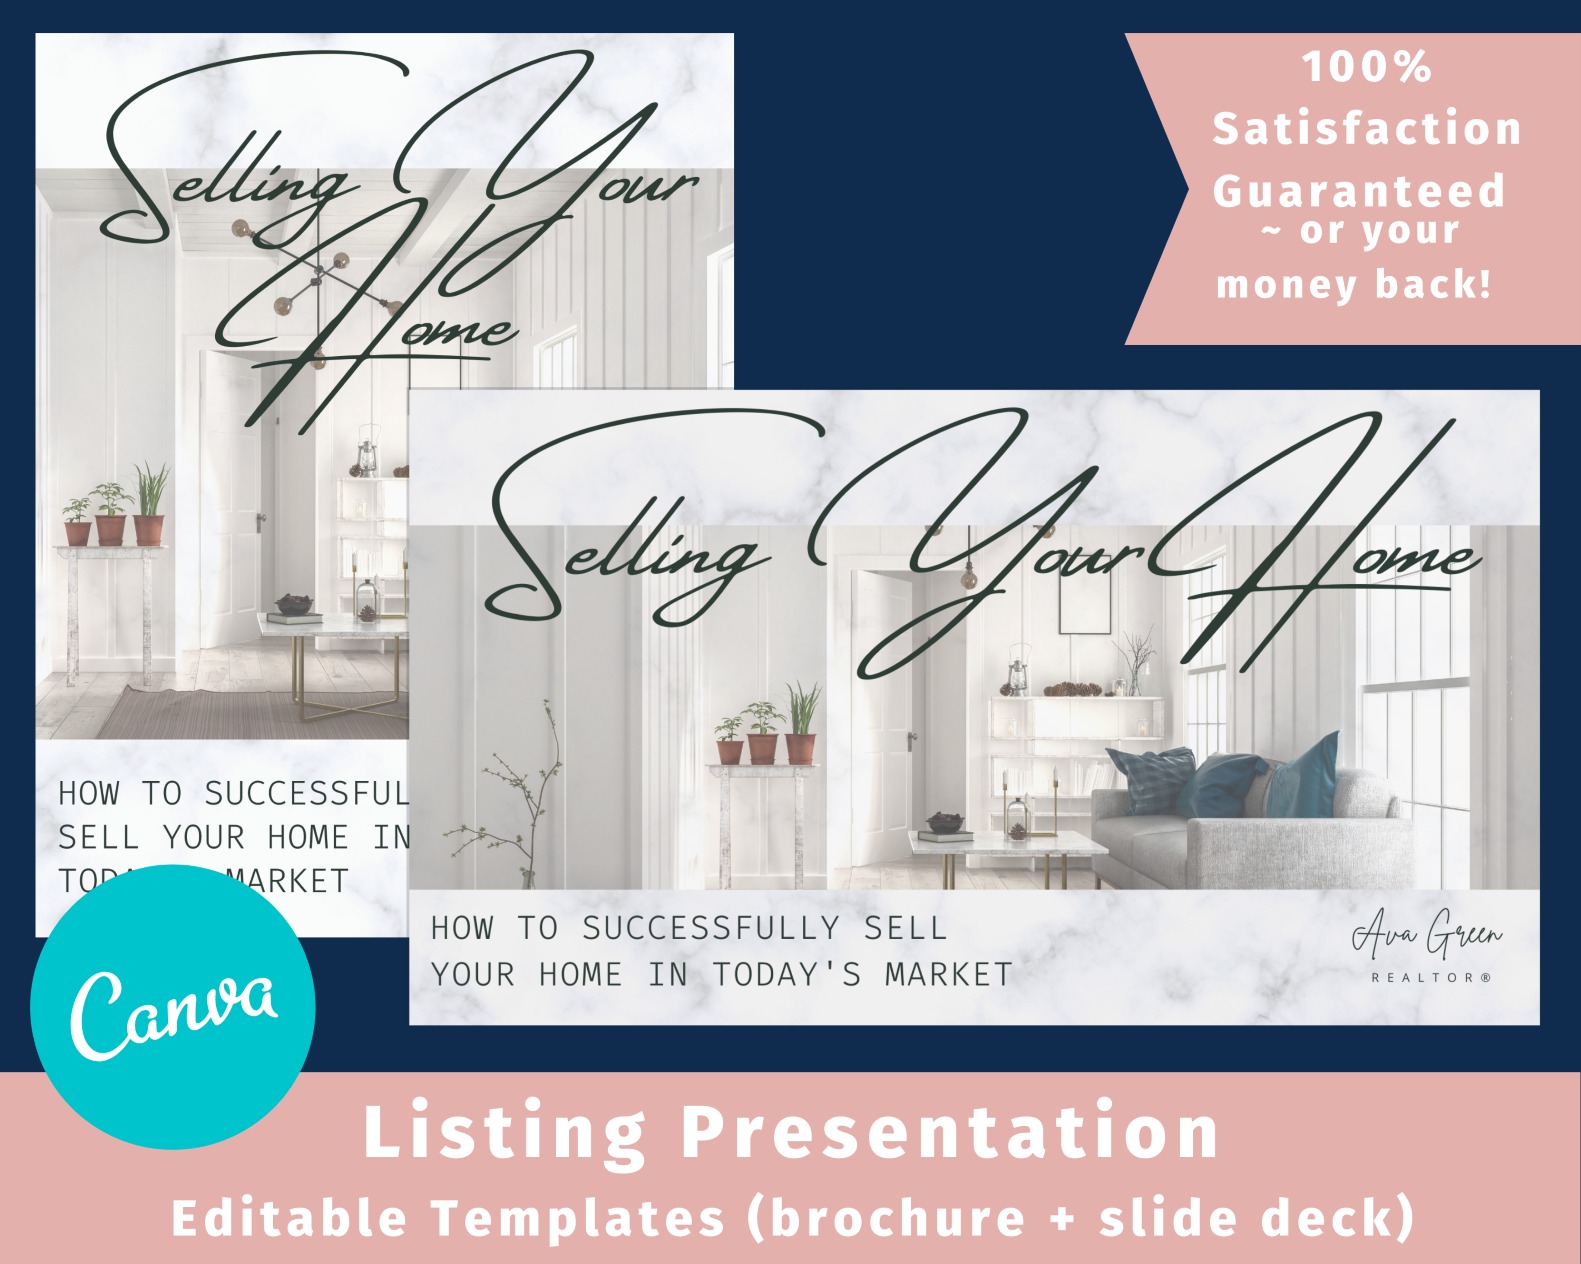 before making a listing presentation an agent should